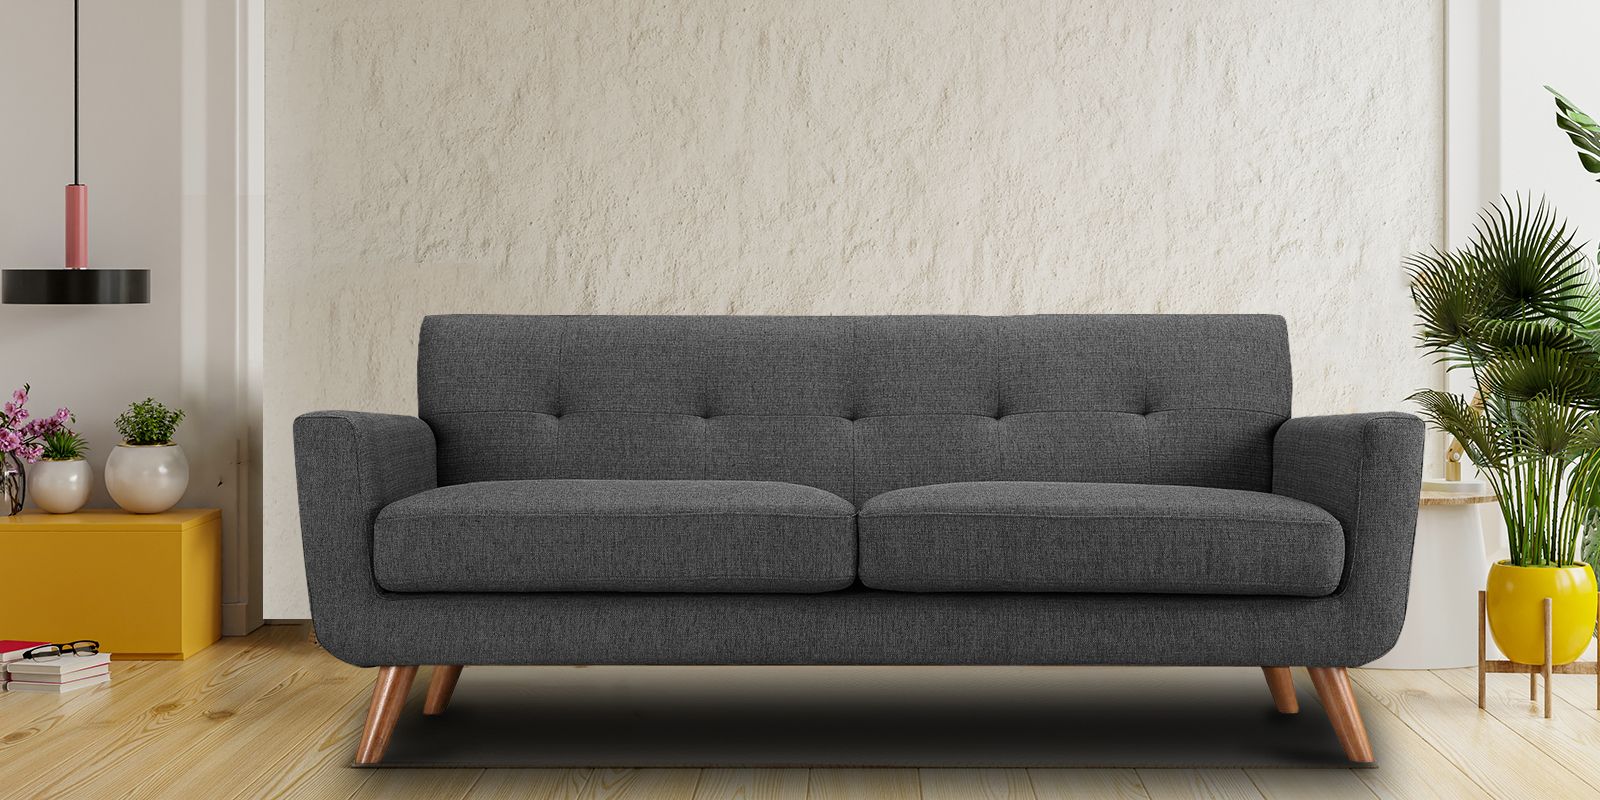 Mid Century Classic 3 Seater Sofa In Grey Colour – Dreamzz Furniture Regarding Mid Century 3 Seat Couches (Gallery 3 of 20)